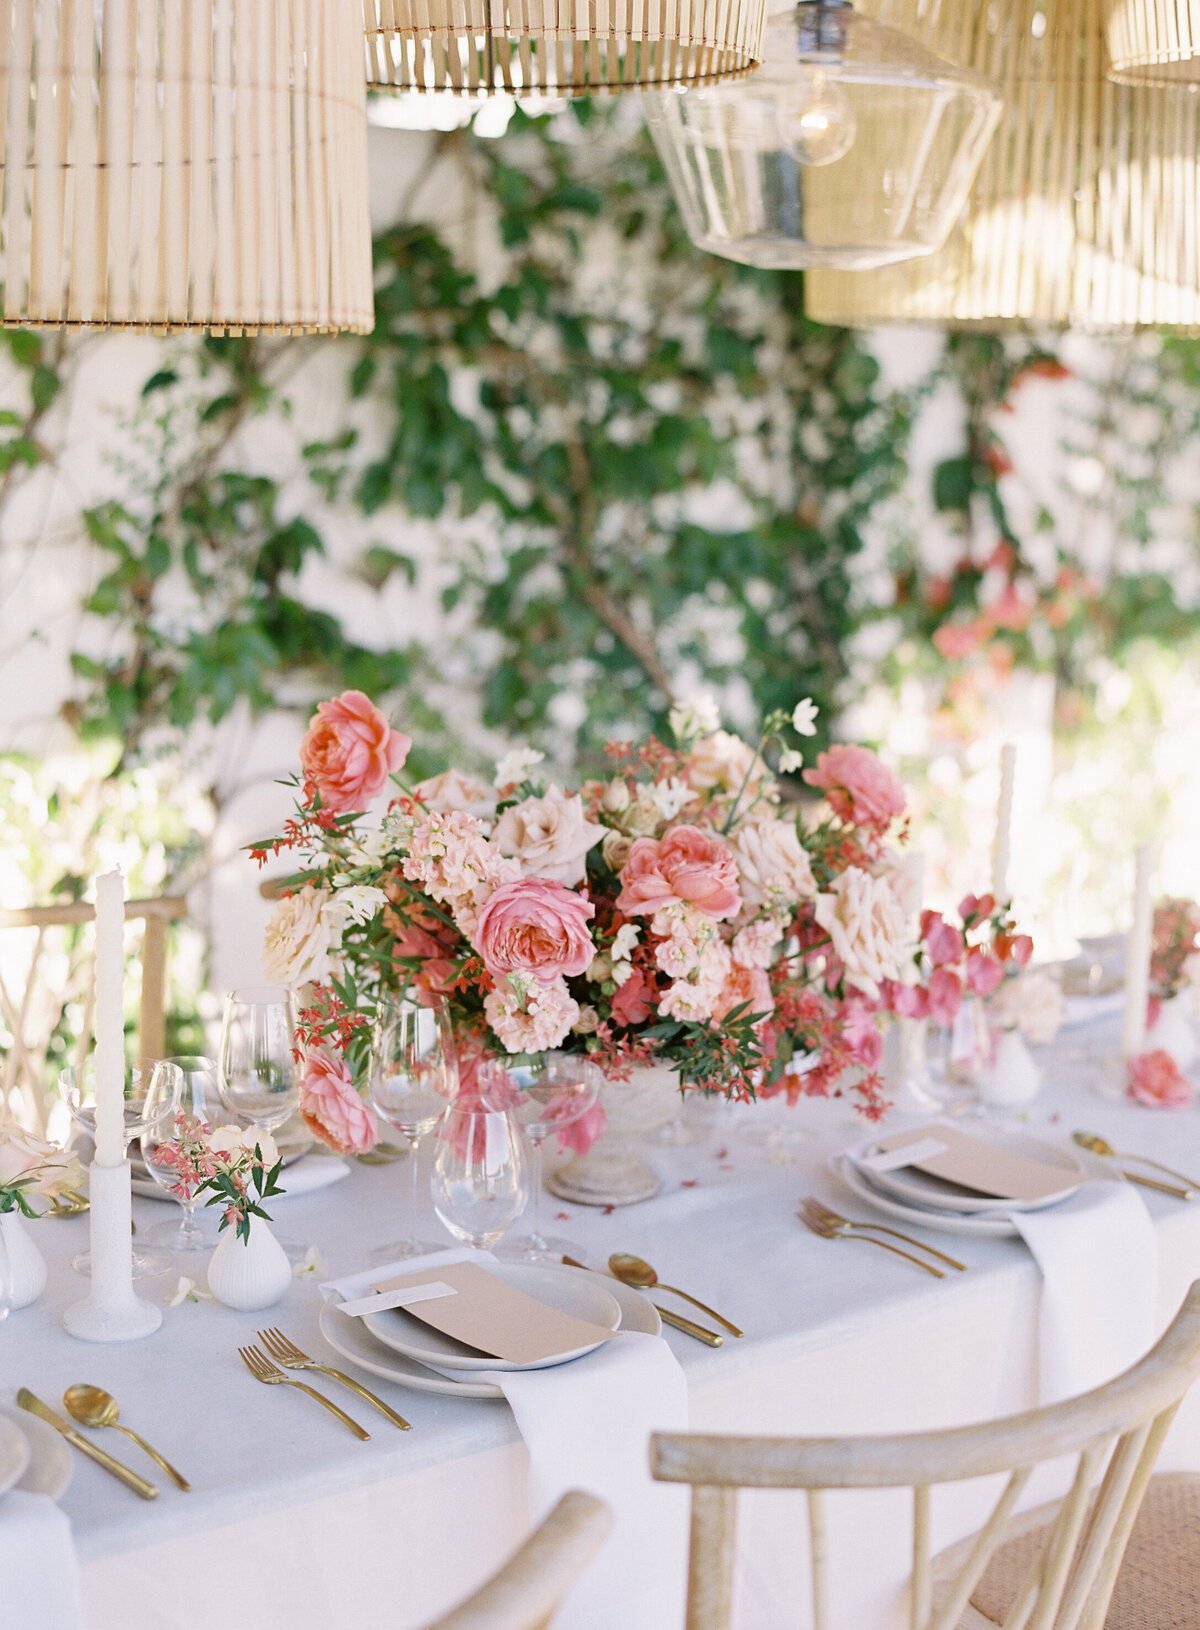 Table details with flower arrangements photographed during a luxury wedding at Montecito Club in Santa Barbara by Wedding Photographers Pinnel Photography